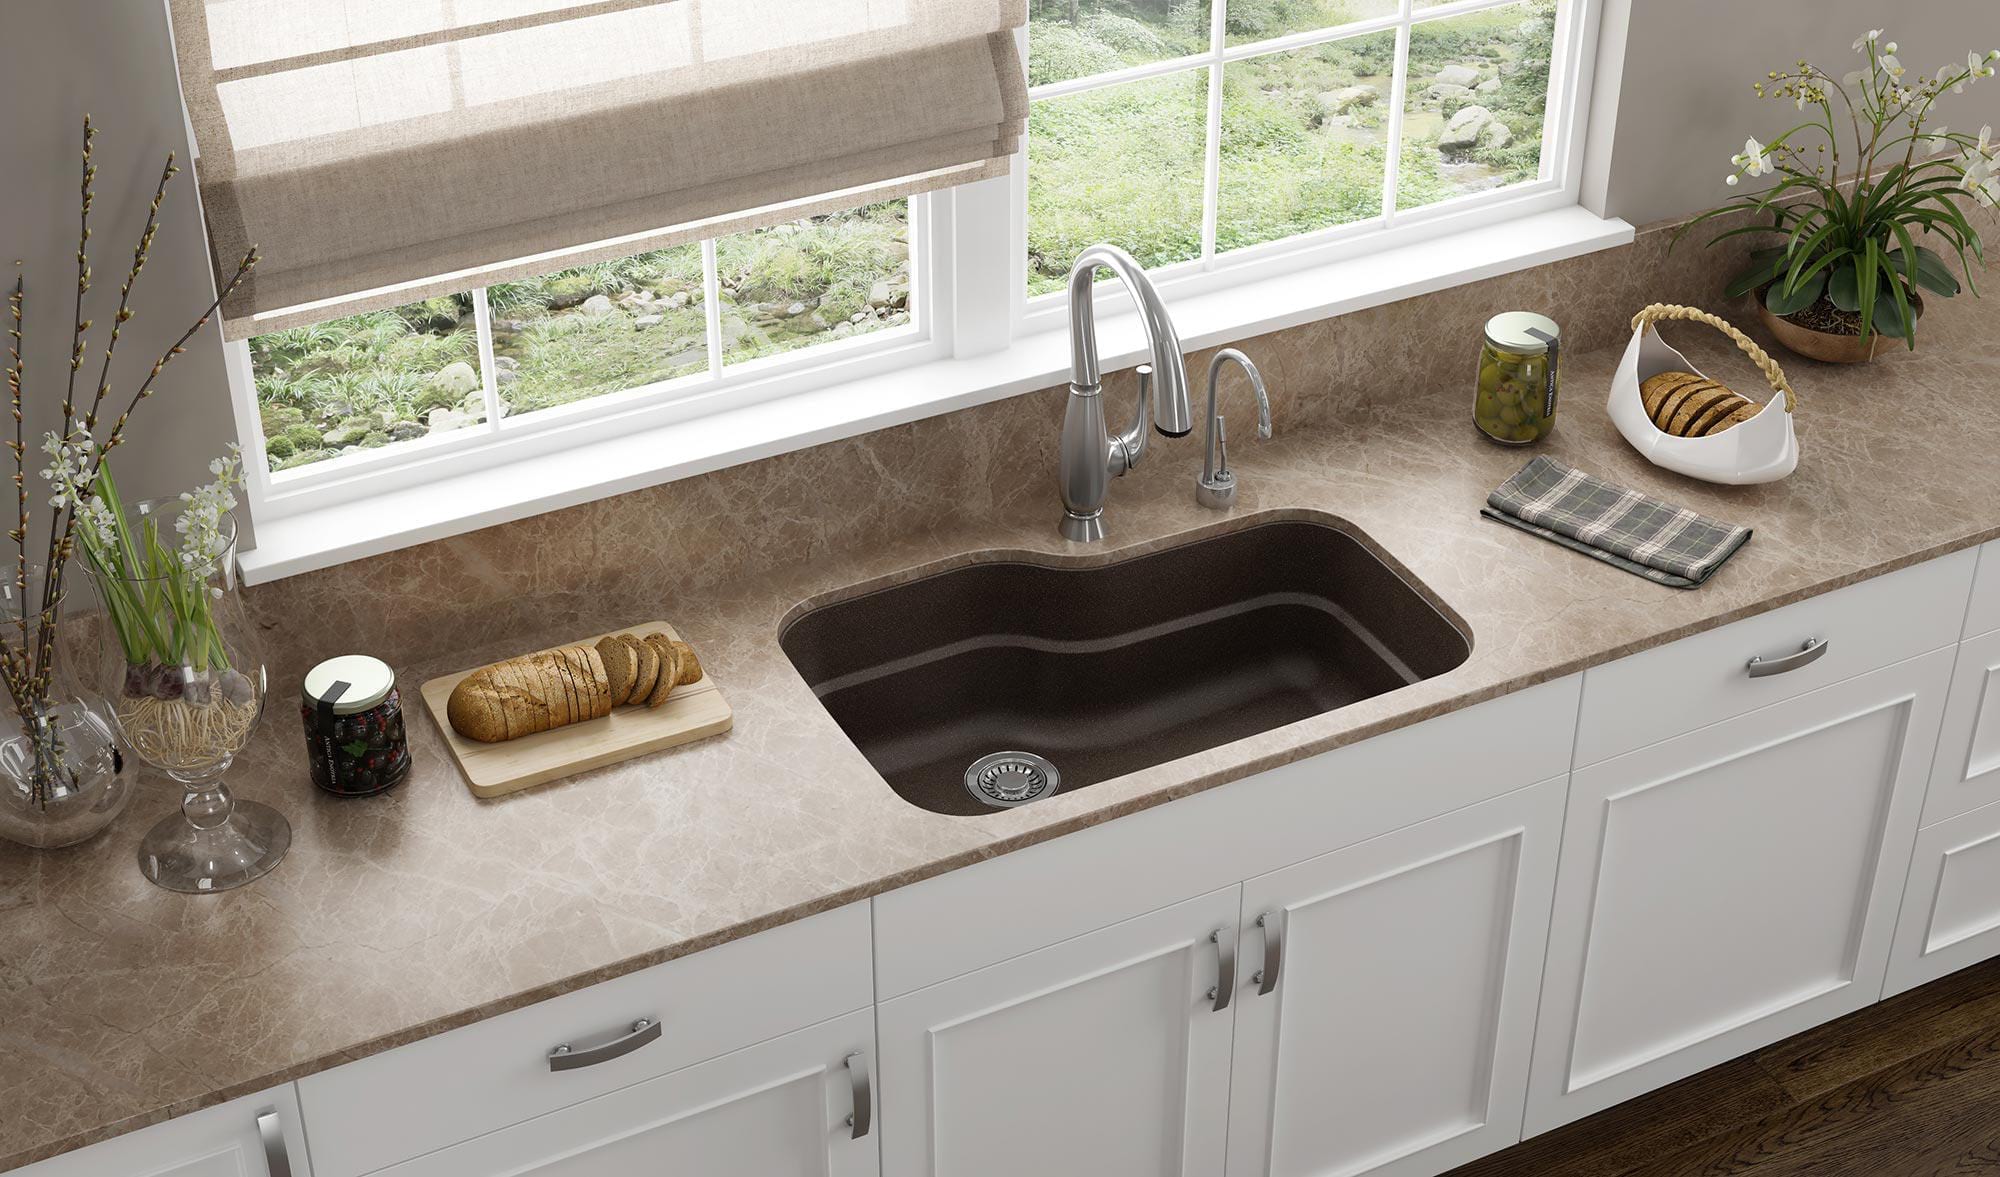 Granite Sinks Everything You Need To Know Qualitybath Com Discover